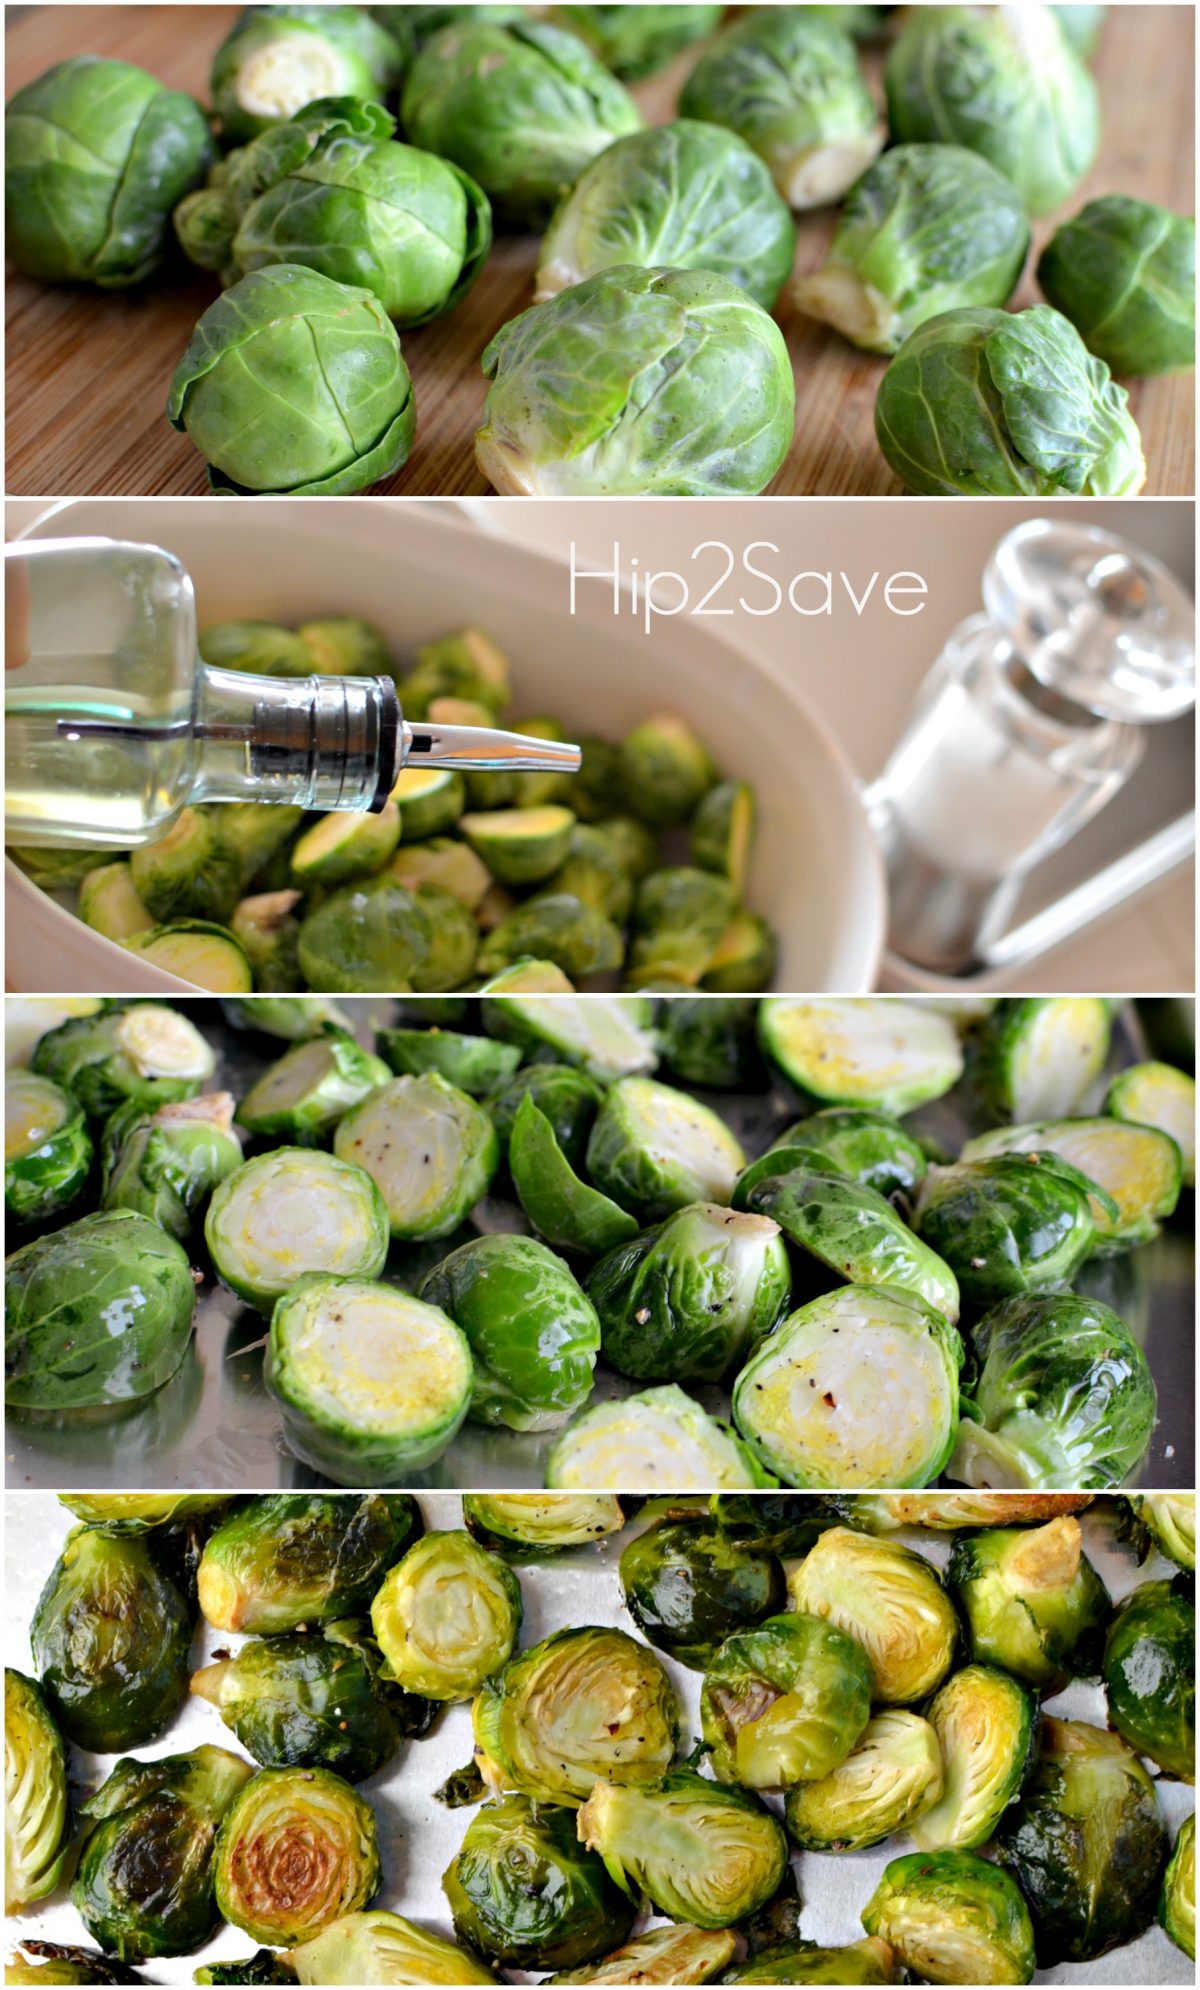 How to roast brussels sprouts